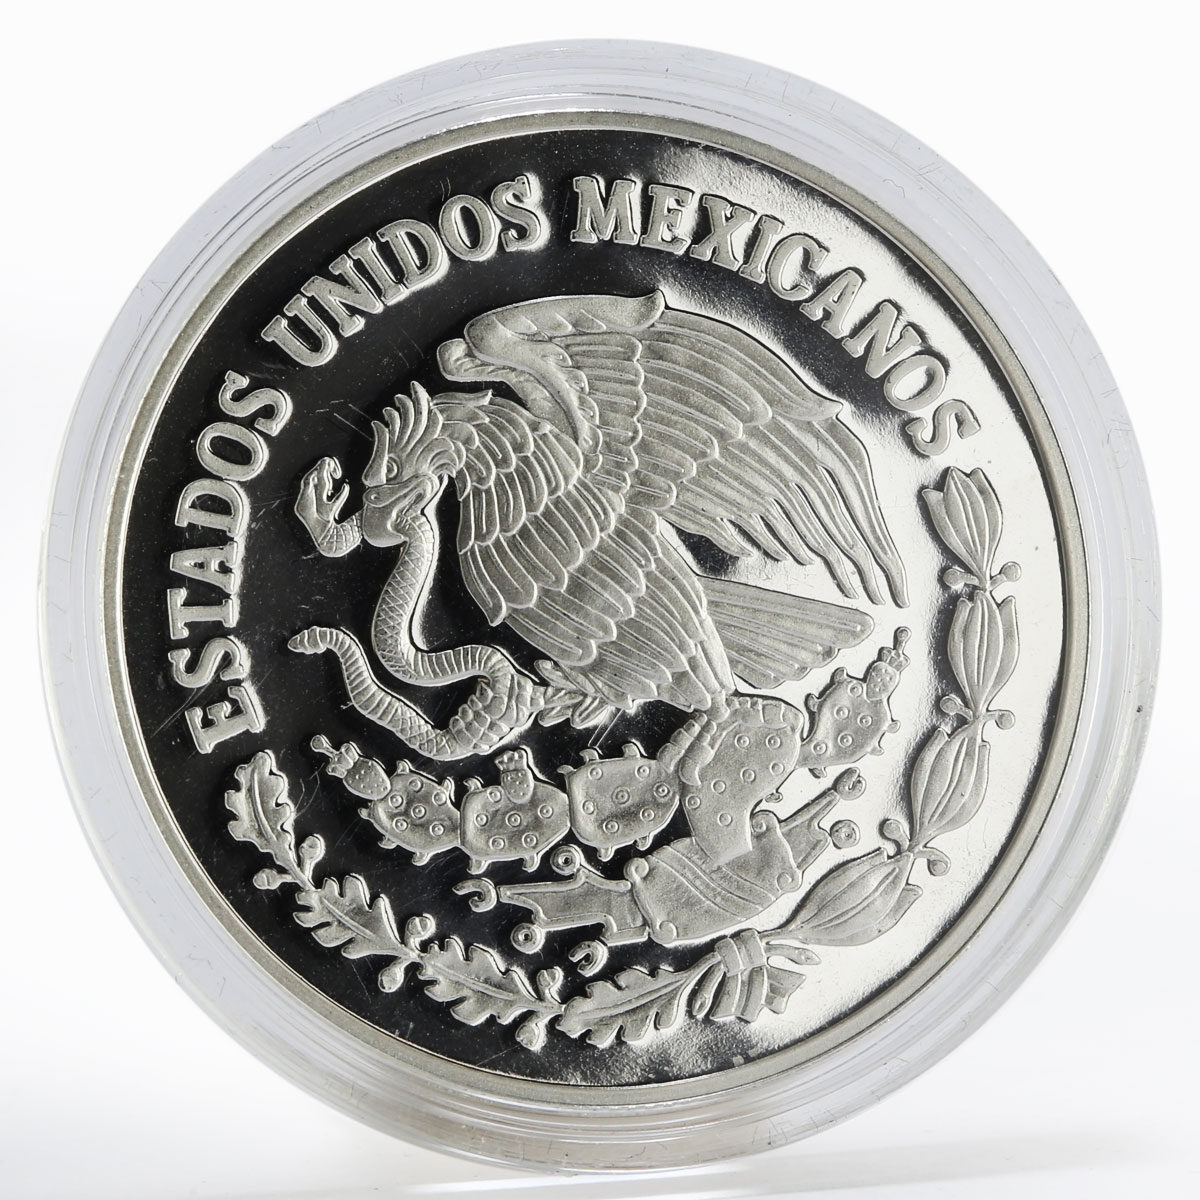 Mexico 5 pesos World Cup Soccer Games FIFA Player proof silver coin 2006